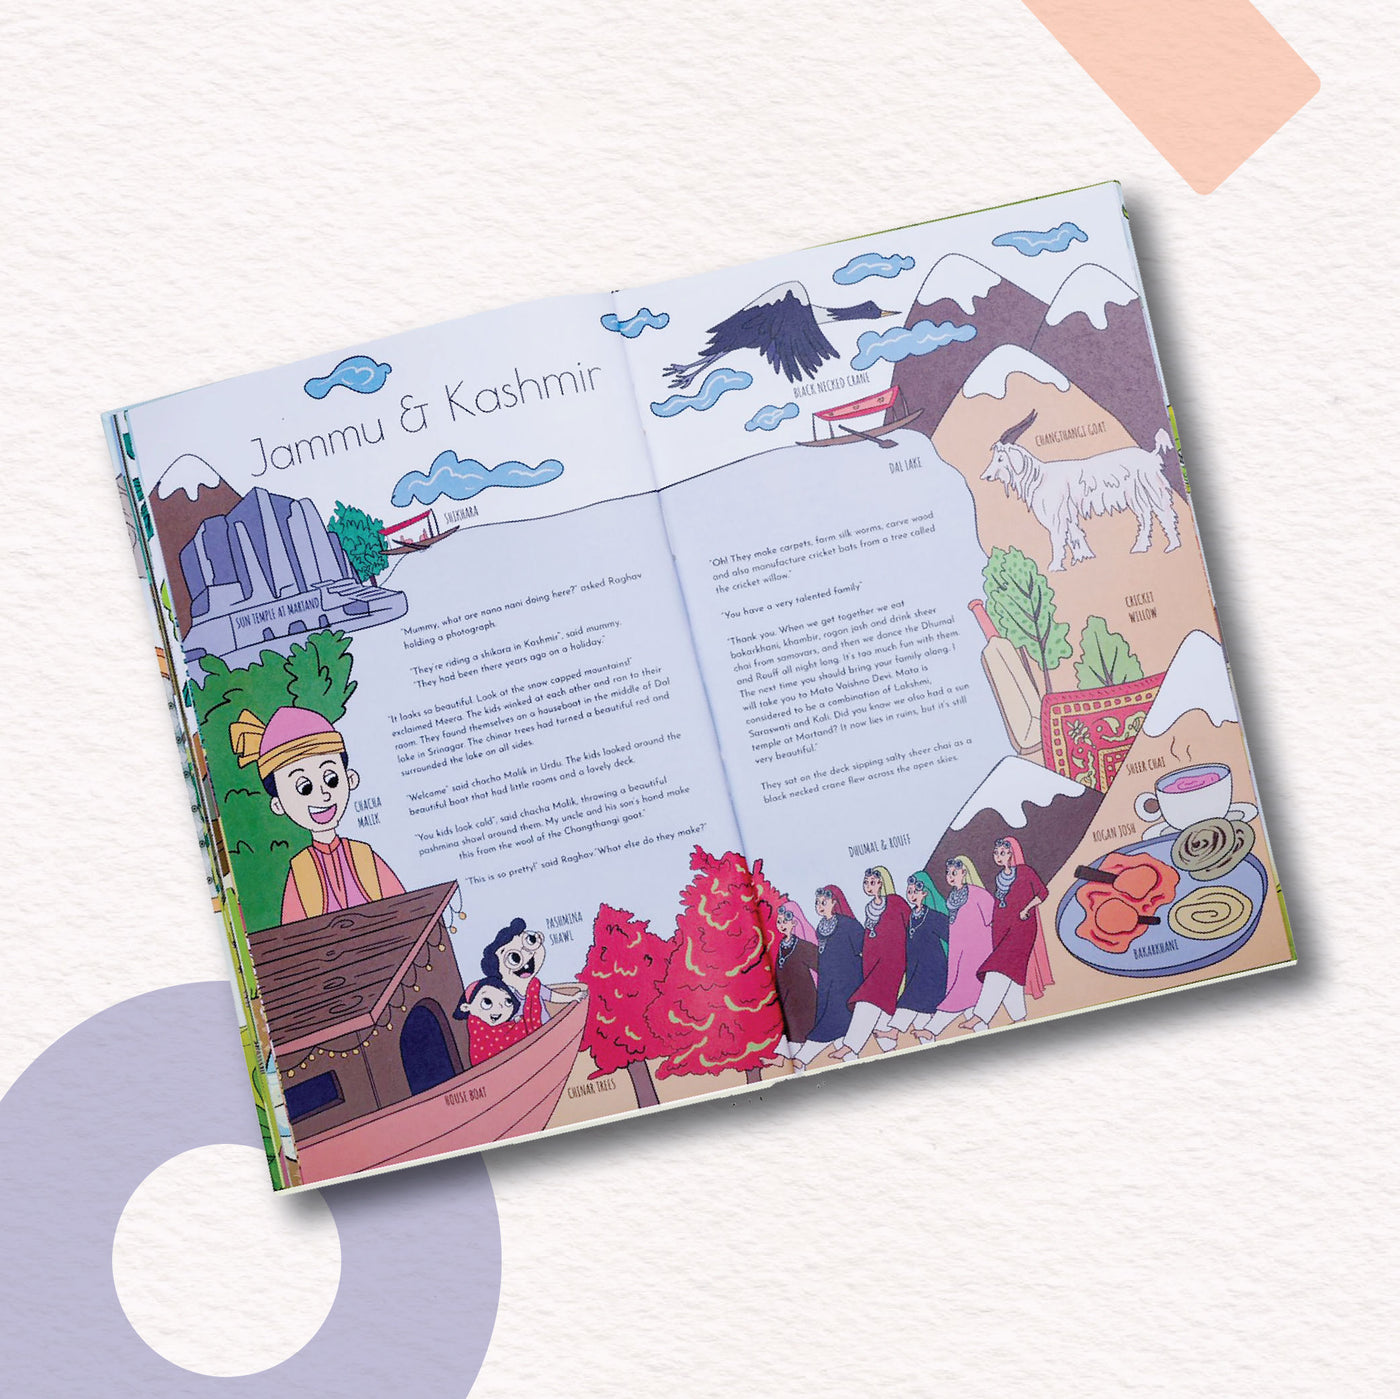 An Illustrated Ramayan & The Great Indian Travelogue Combo